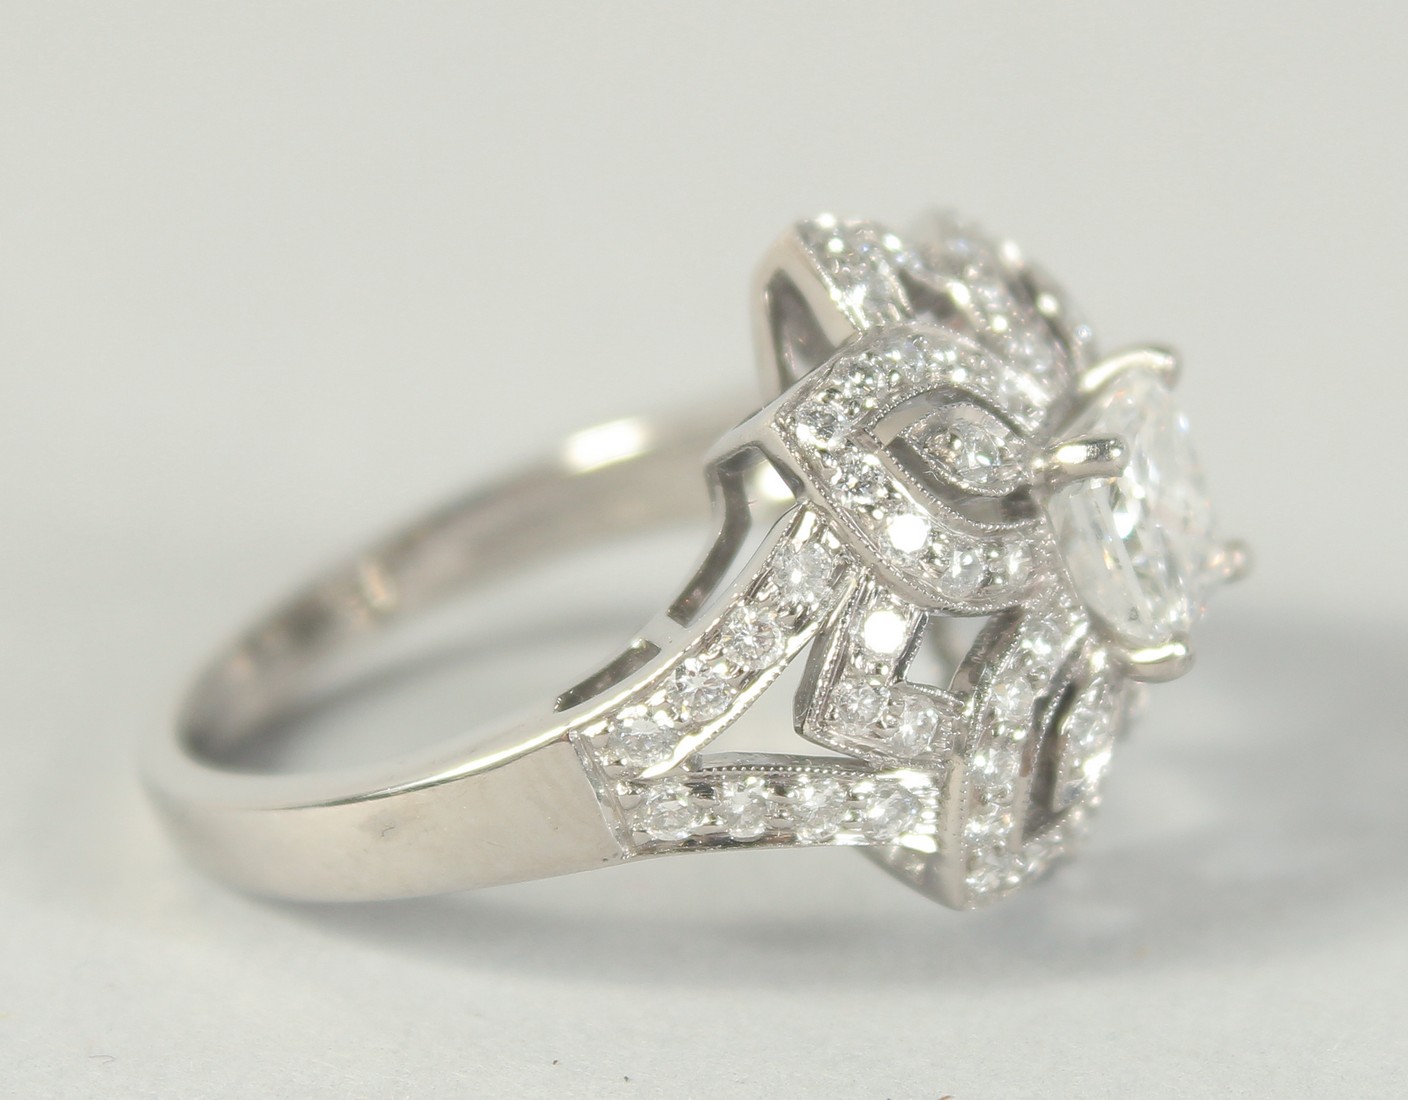 A GOOD 18CT WHITE GOLD DIAMOND COCKTAIL RING. - Image 3 of 5